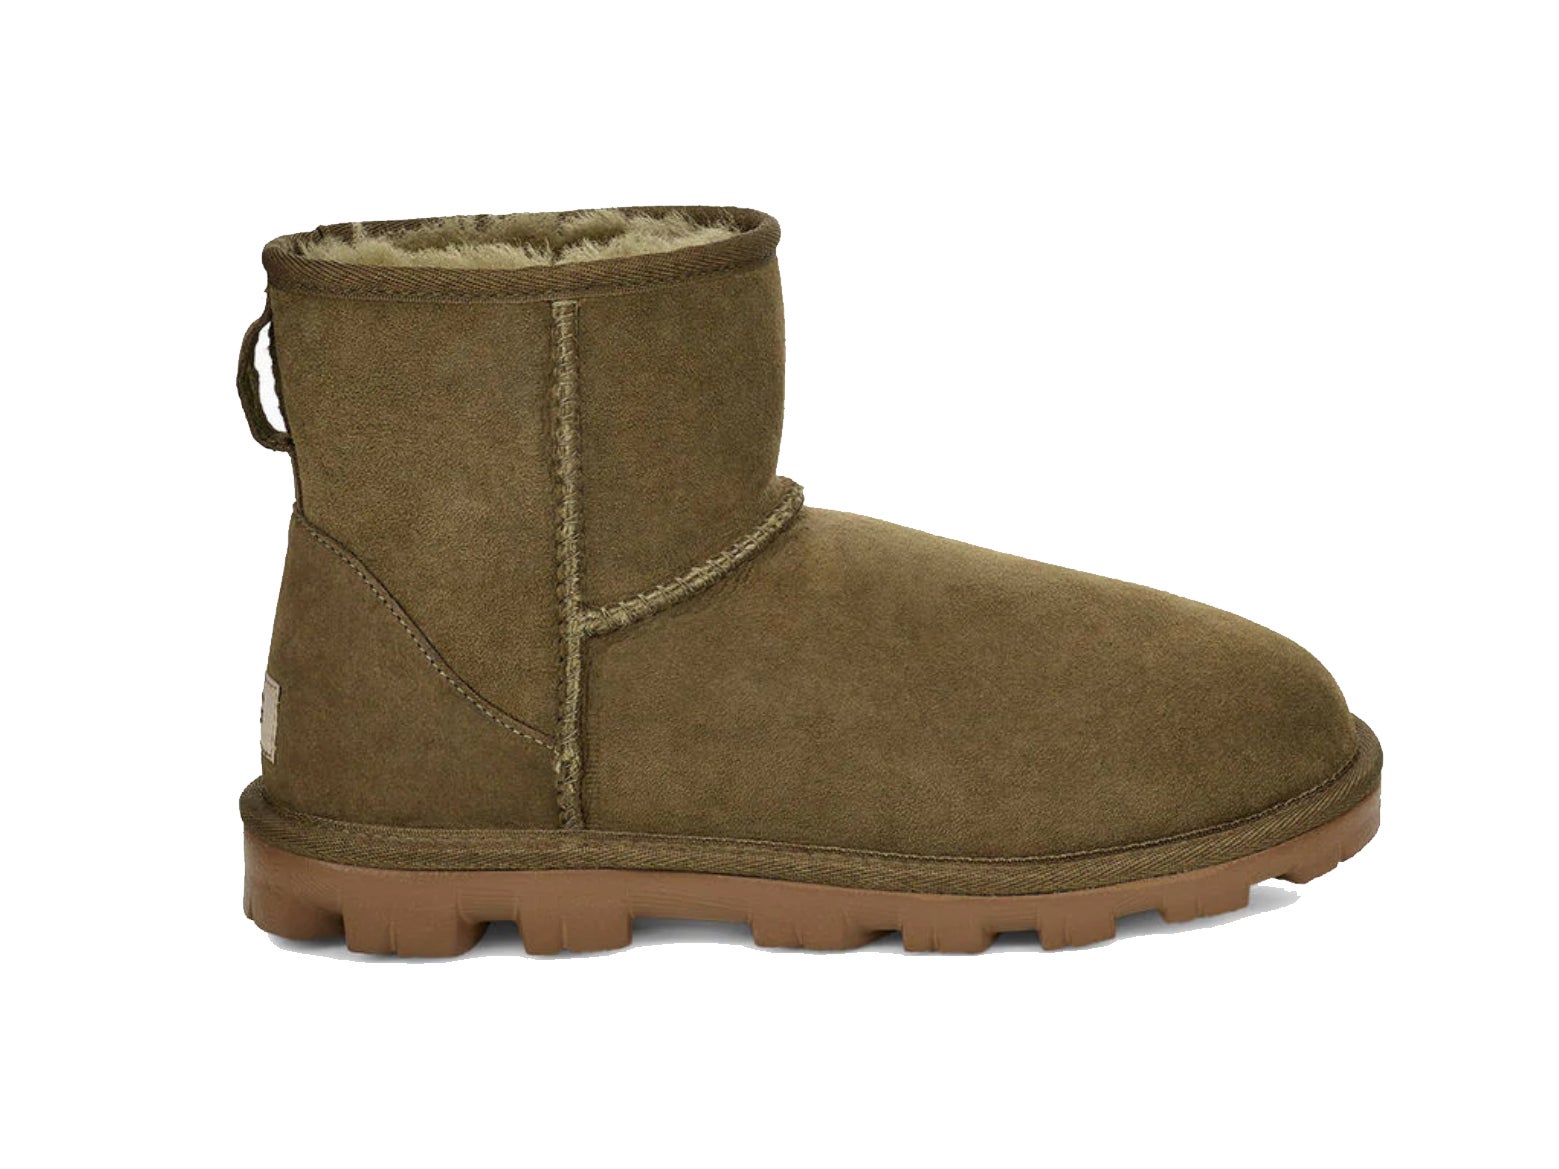 Ugg Boxing Day sale: Best deals on 